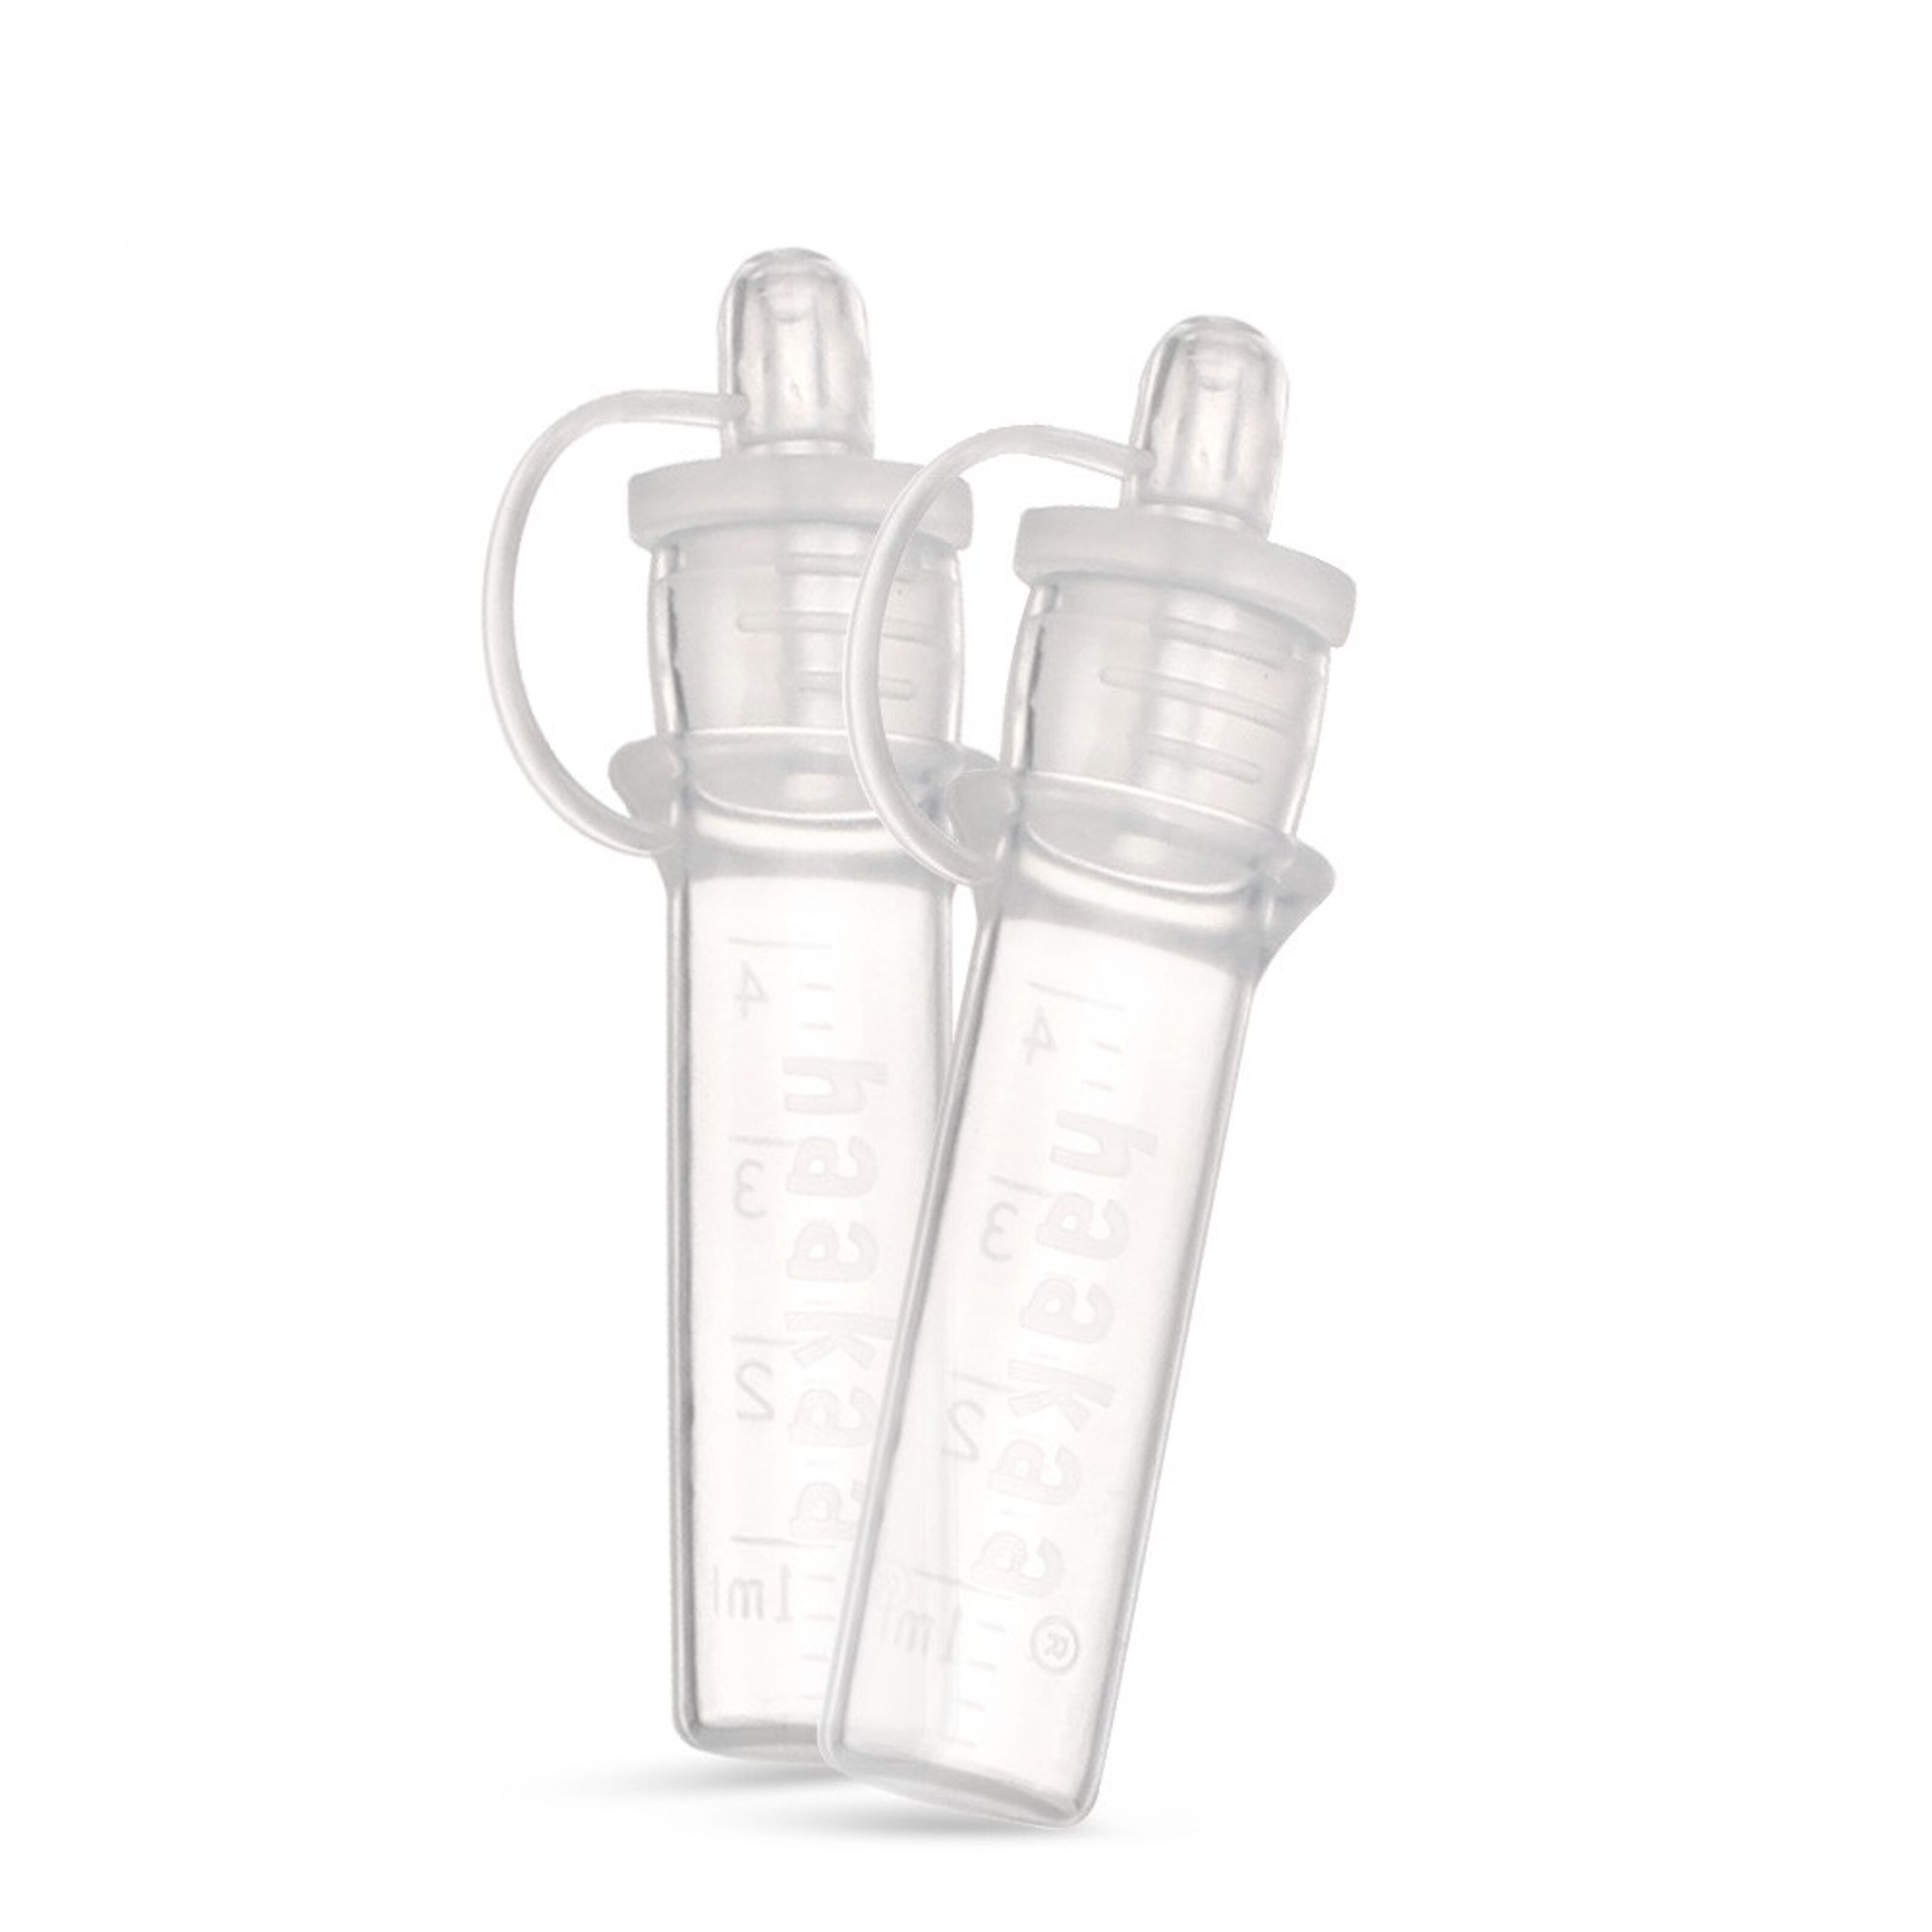 Haakaa-Silicone Colostrum Collector Set-6 x Colostrum Collectors (4ml)